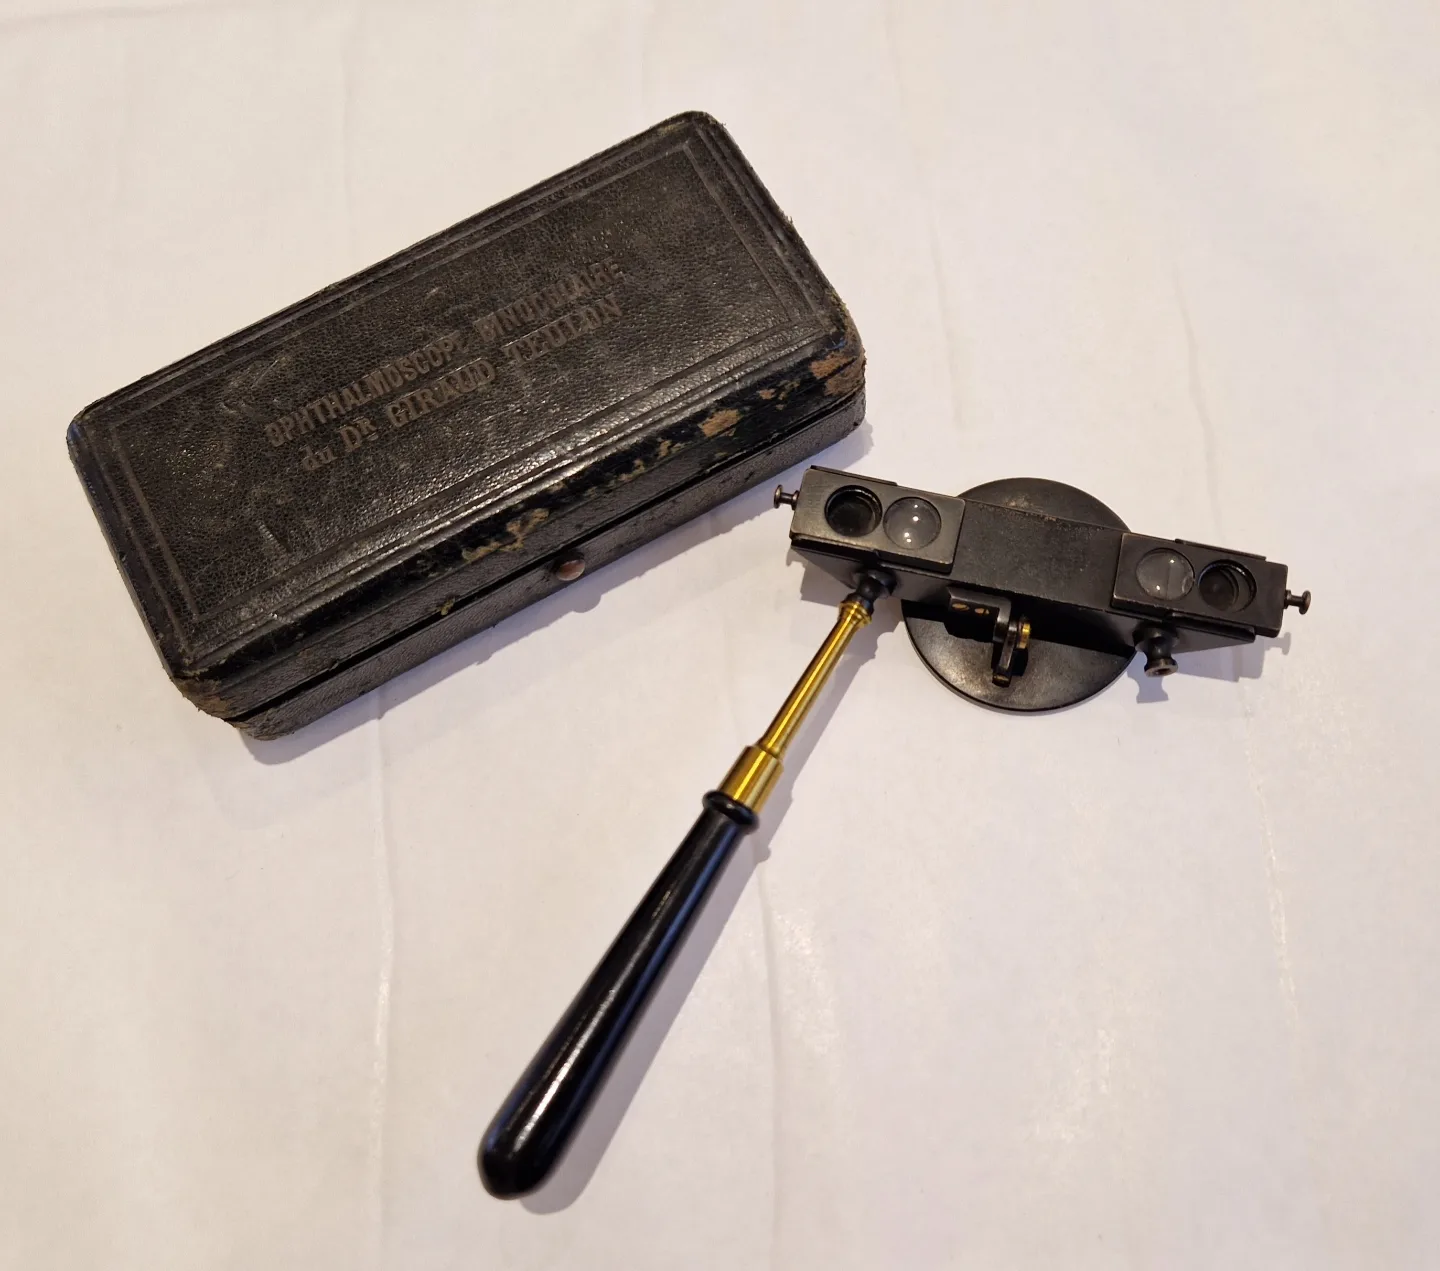 The rare first binocular ophthalmoscope after Giraud-Teulon